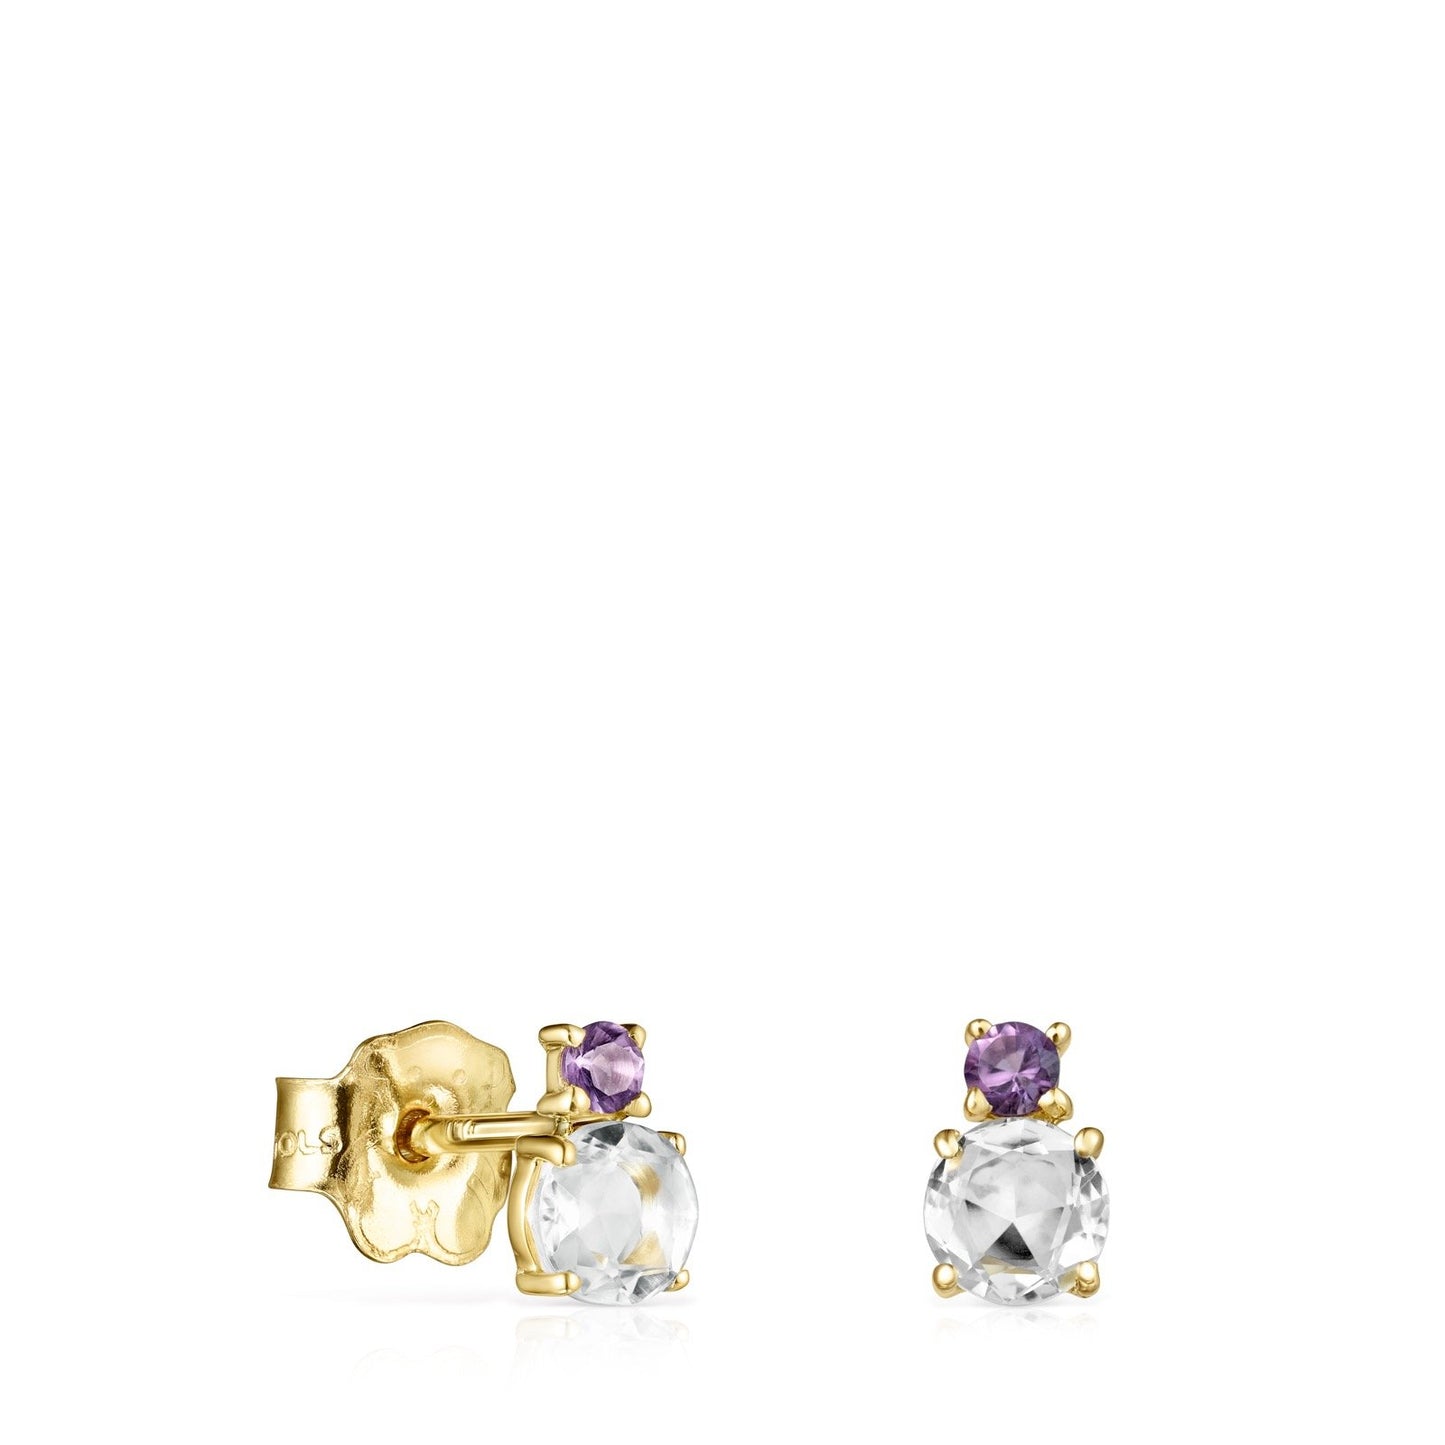 Tous Mini Ivette Earrings in Gold with Prasiolite and Amethyst 912193030